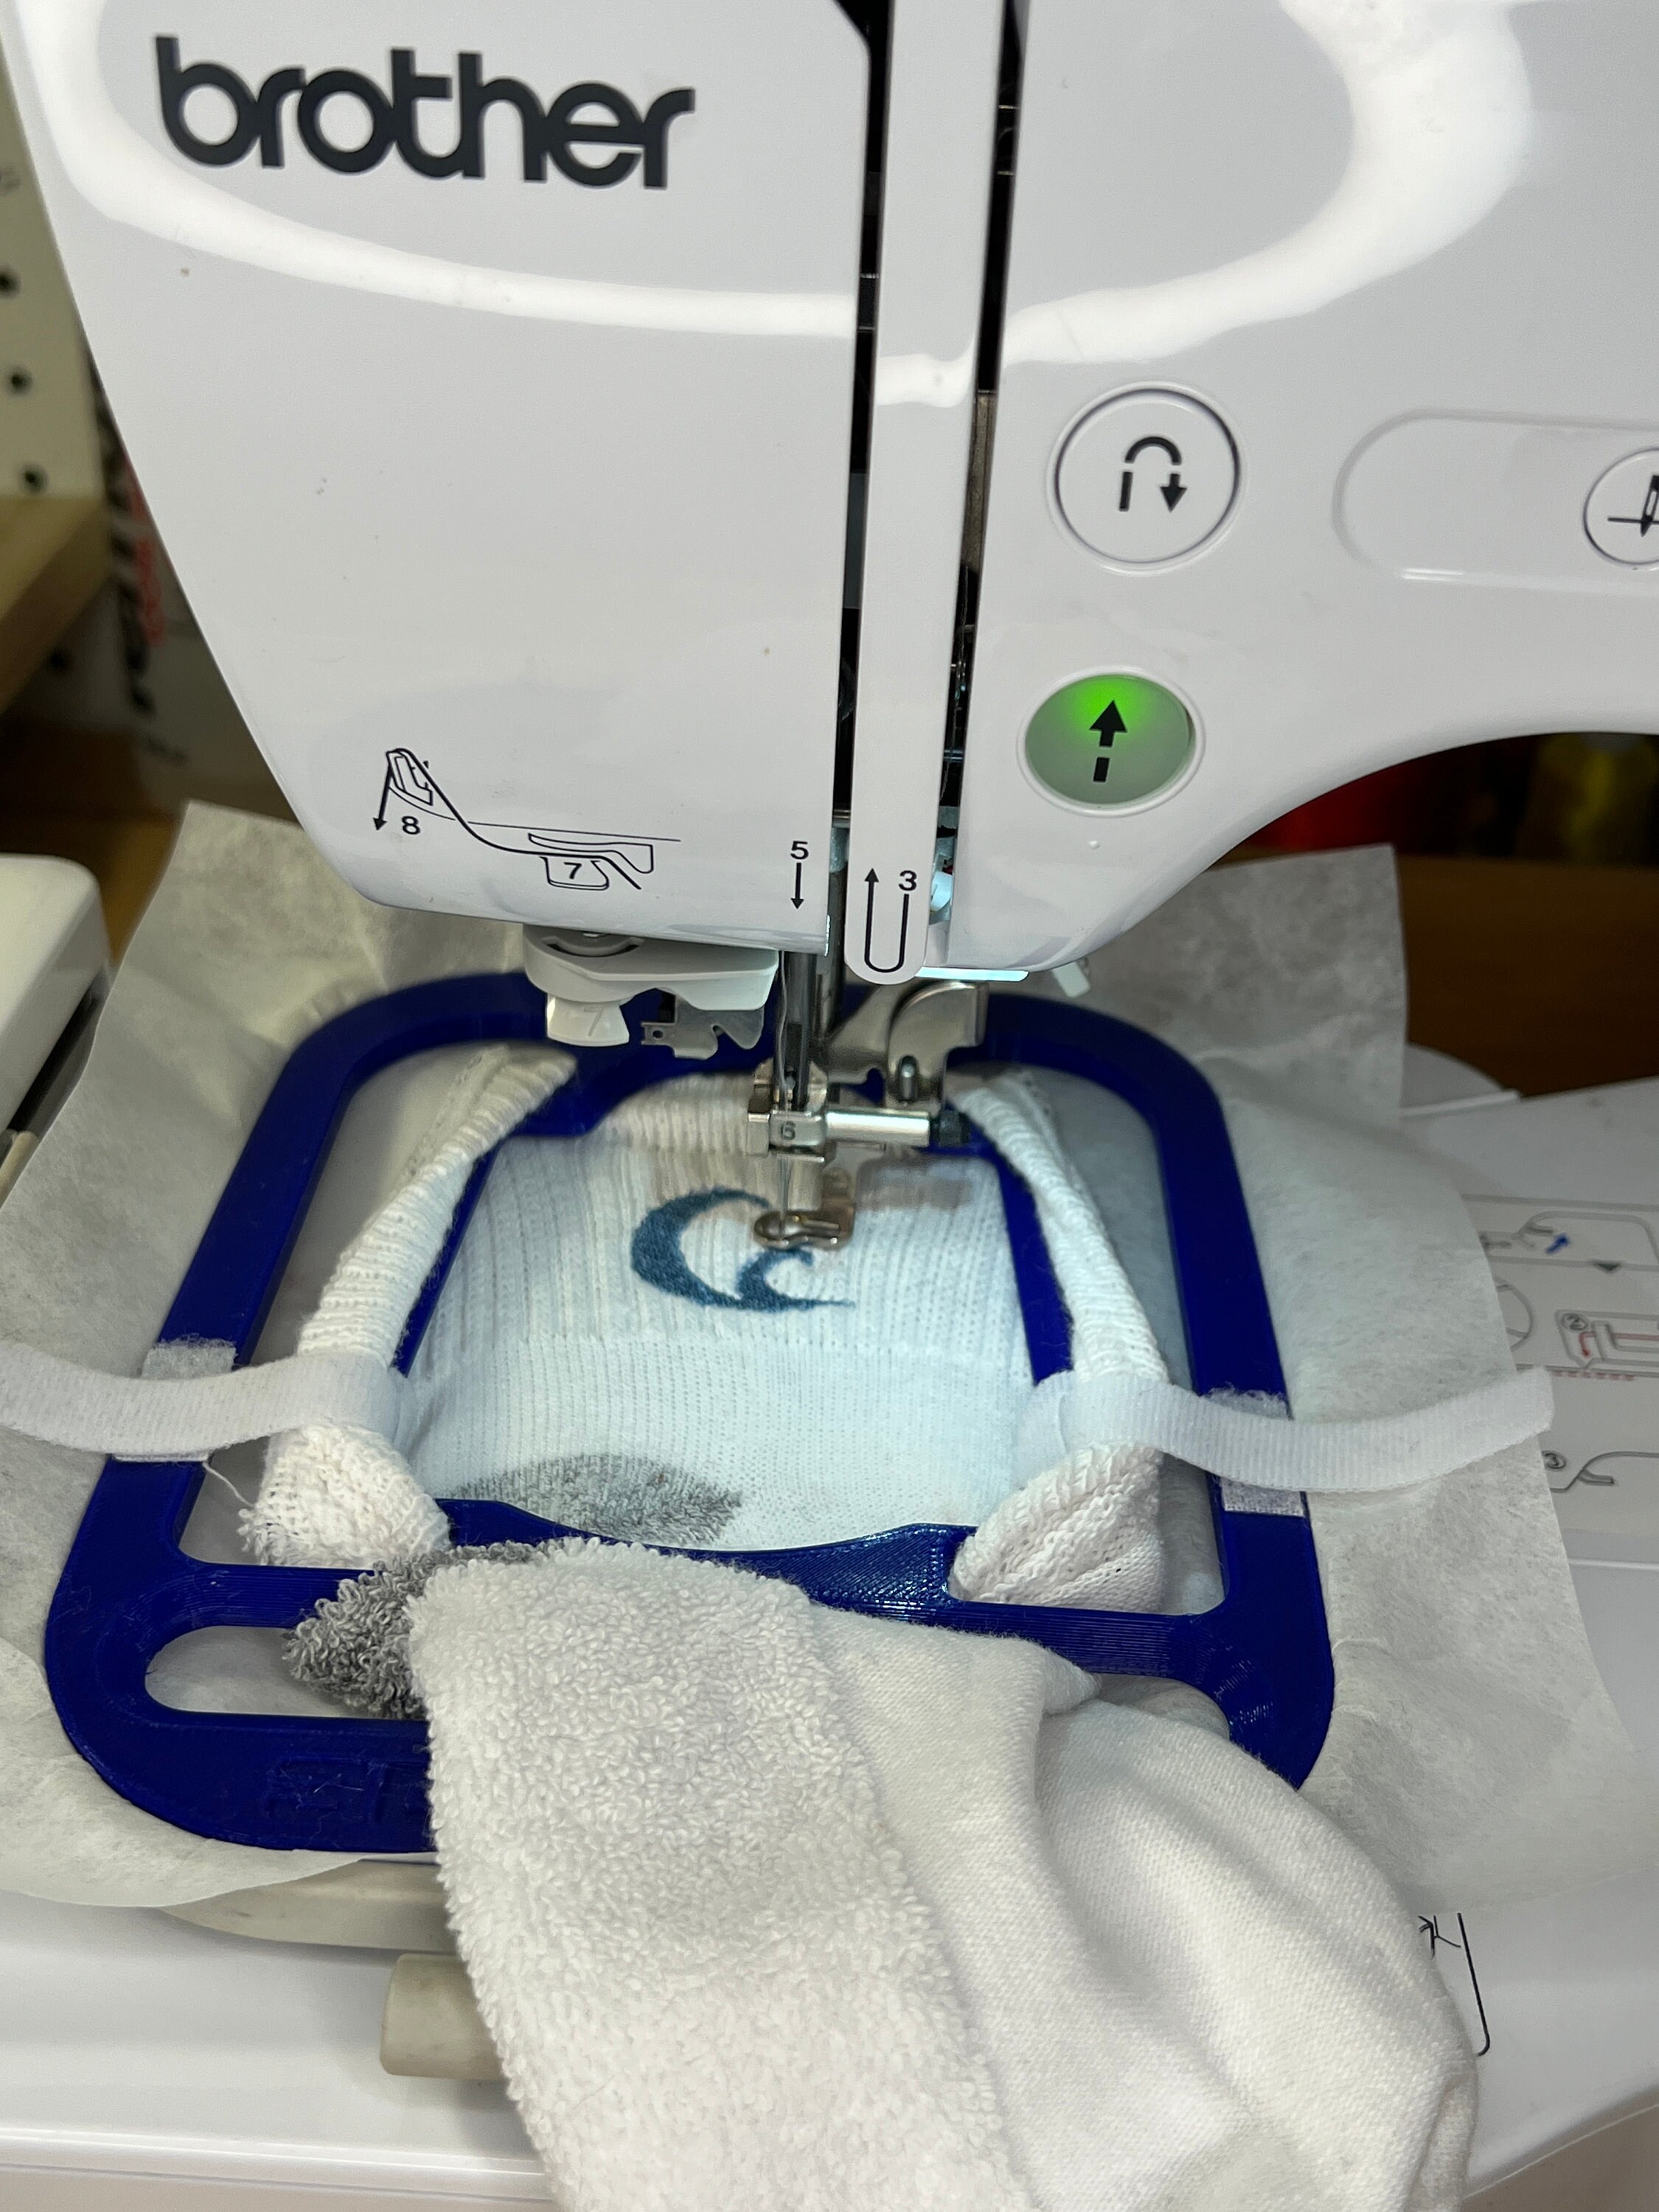 Sew Tech Embroidery Hoops for Brother SE600 SE400 SE700 SE625 SE425 PE550D PE540D PE535 PE525 Pe500 Innovis Babylock Brother Embroidery Machine Hoop